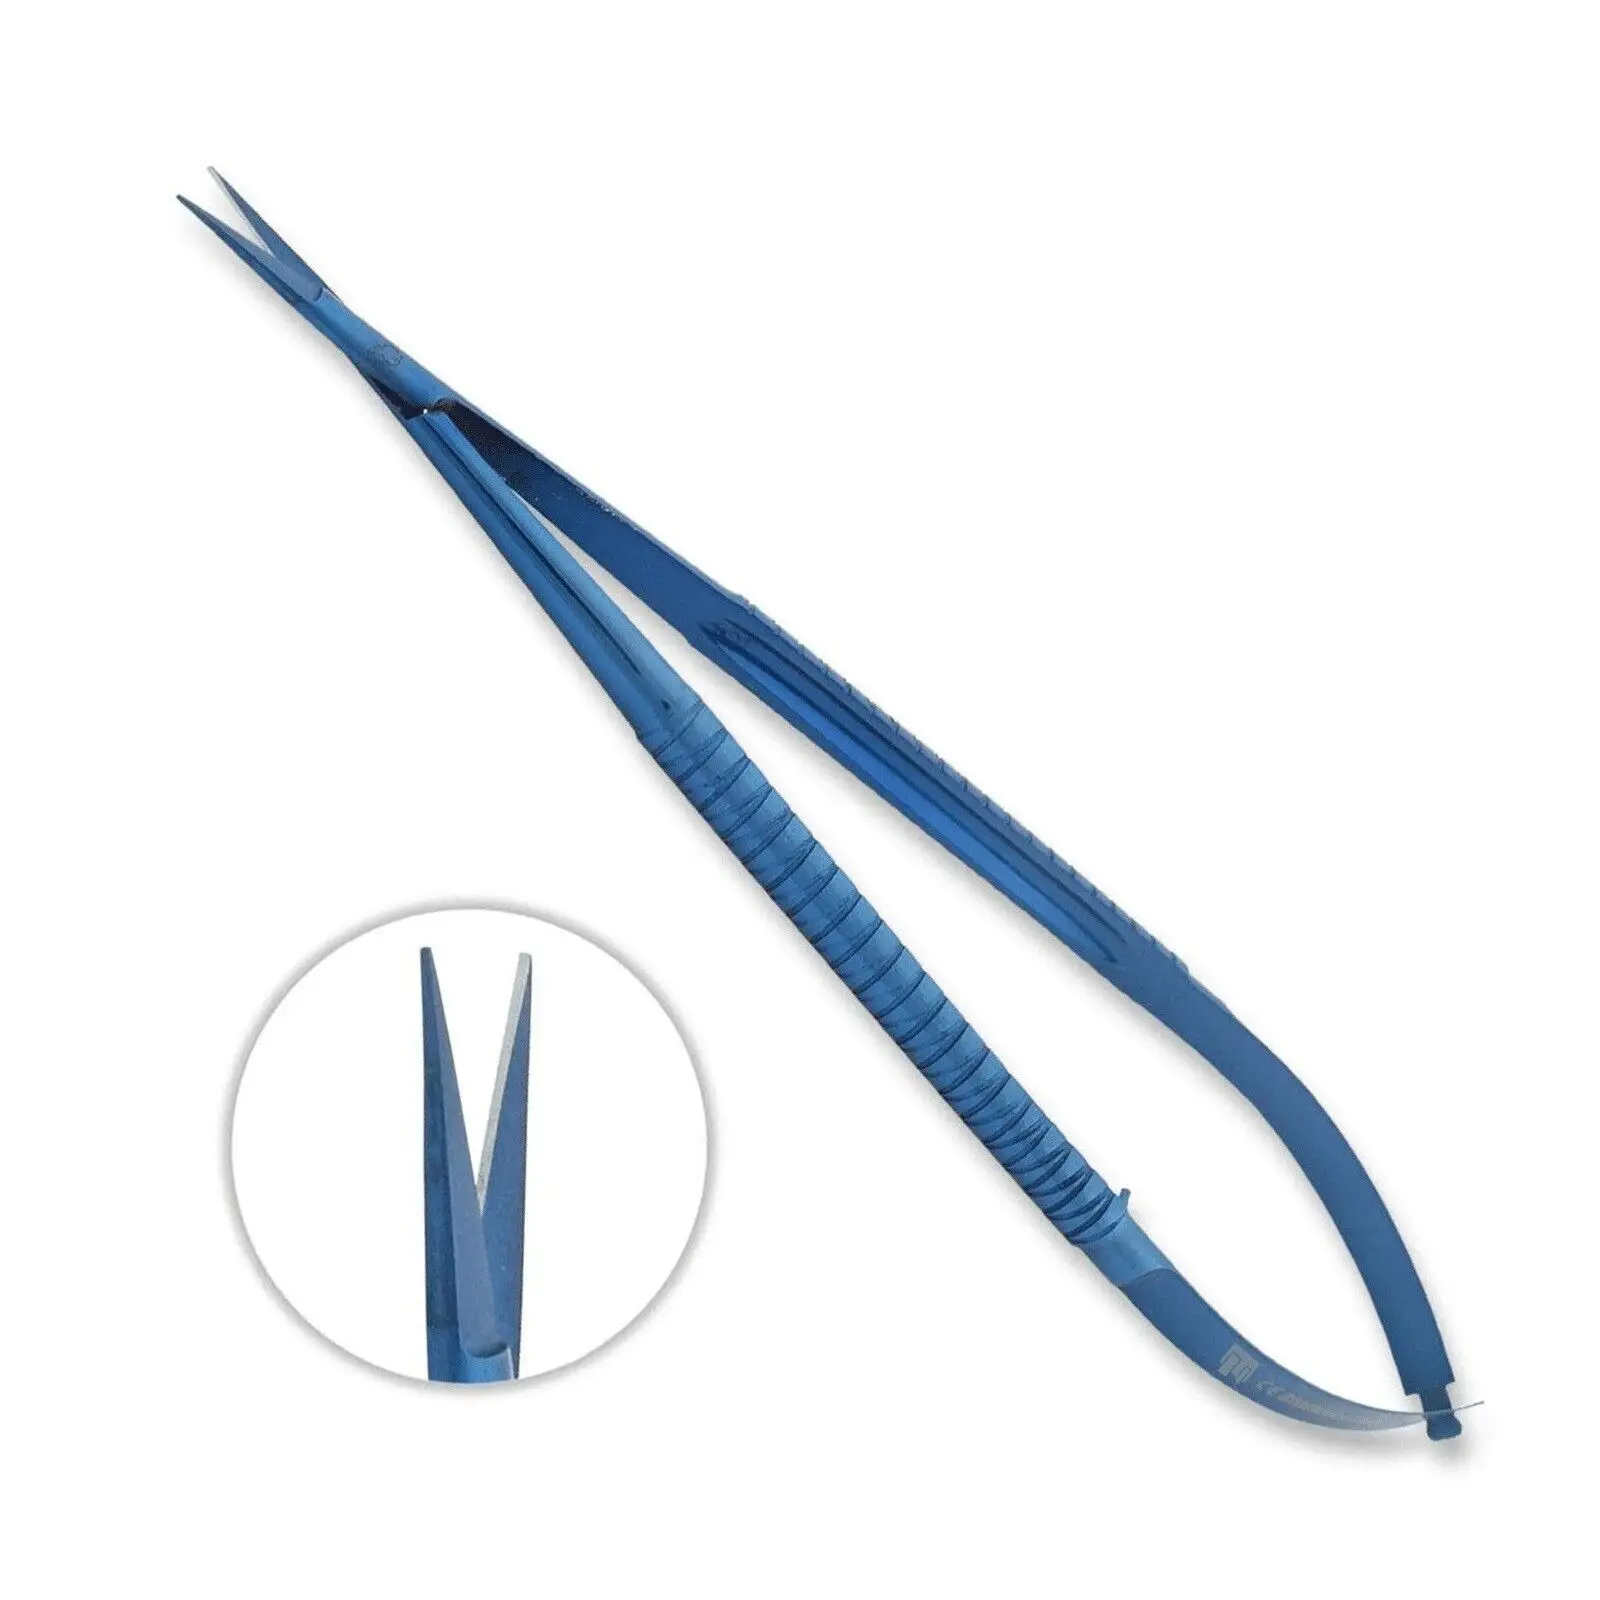 Blue Titanium Micro Dissecting Scissors Delicate Ophthalmic Surgical Dental Tissue Microsurgery CE UKCA Certified